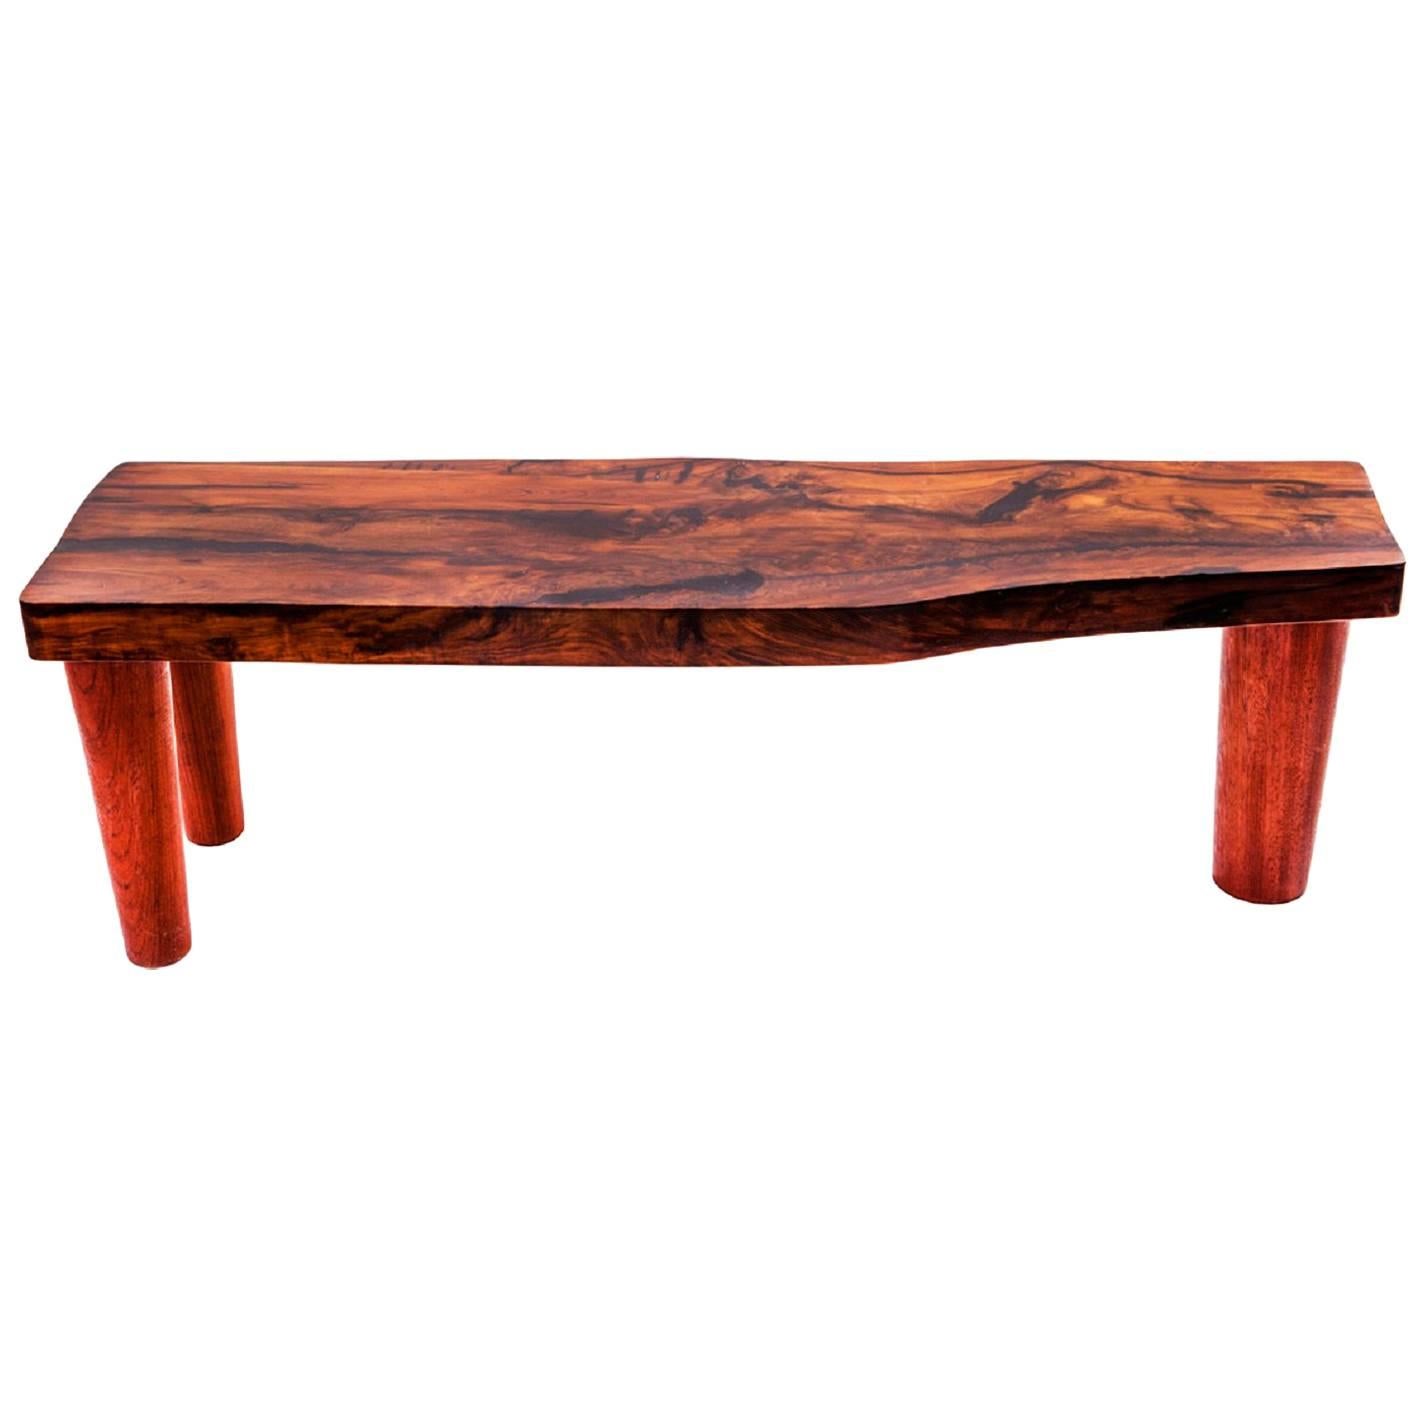 "Imbuia" Bench in Imbuia Wood, Woodworking and contemporary Brazilian Design For Sale